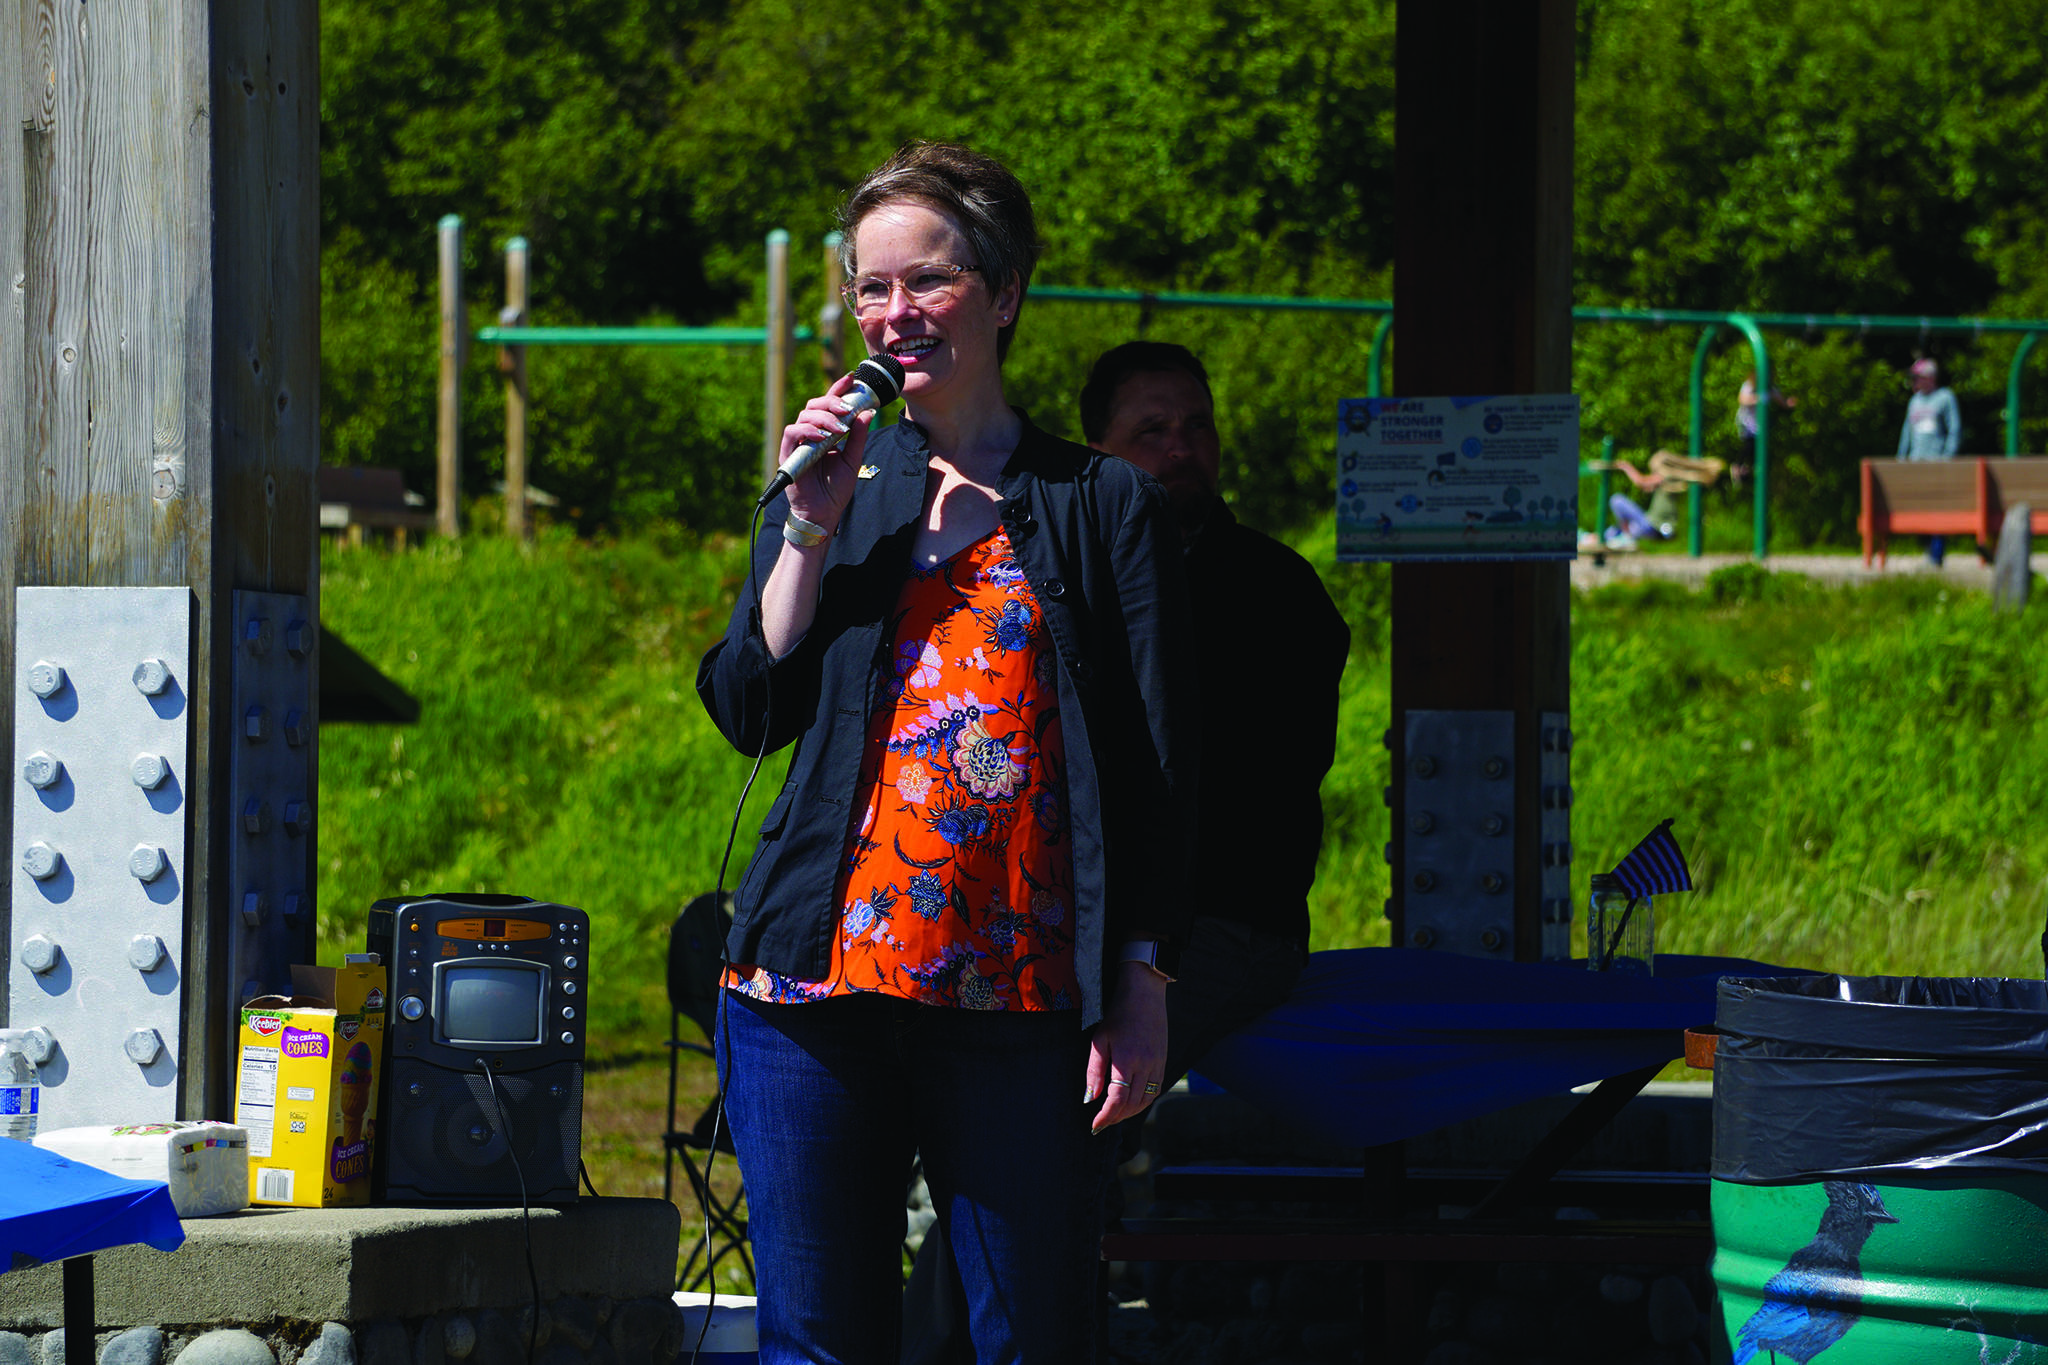 Rep. Sarah Vance, R-Homer, speaks at a kickoff for her re-election campaign on Sunday, June 14, 2020, at Karen Hornaday Park in Homer, Alaska. (Photo by Michael Armstrong/Homer News)